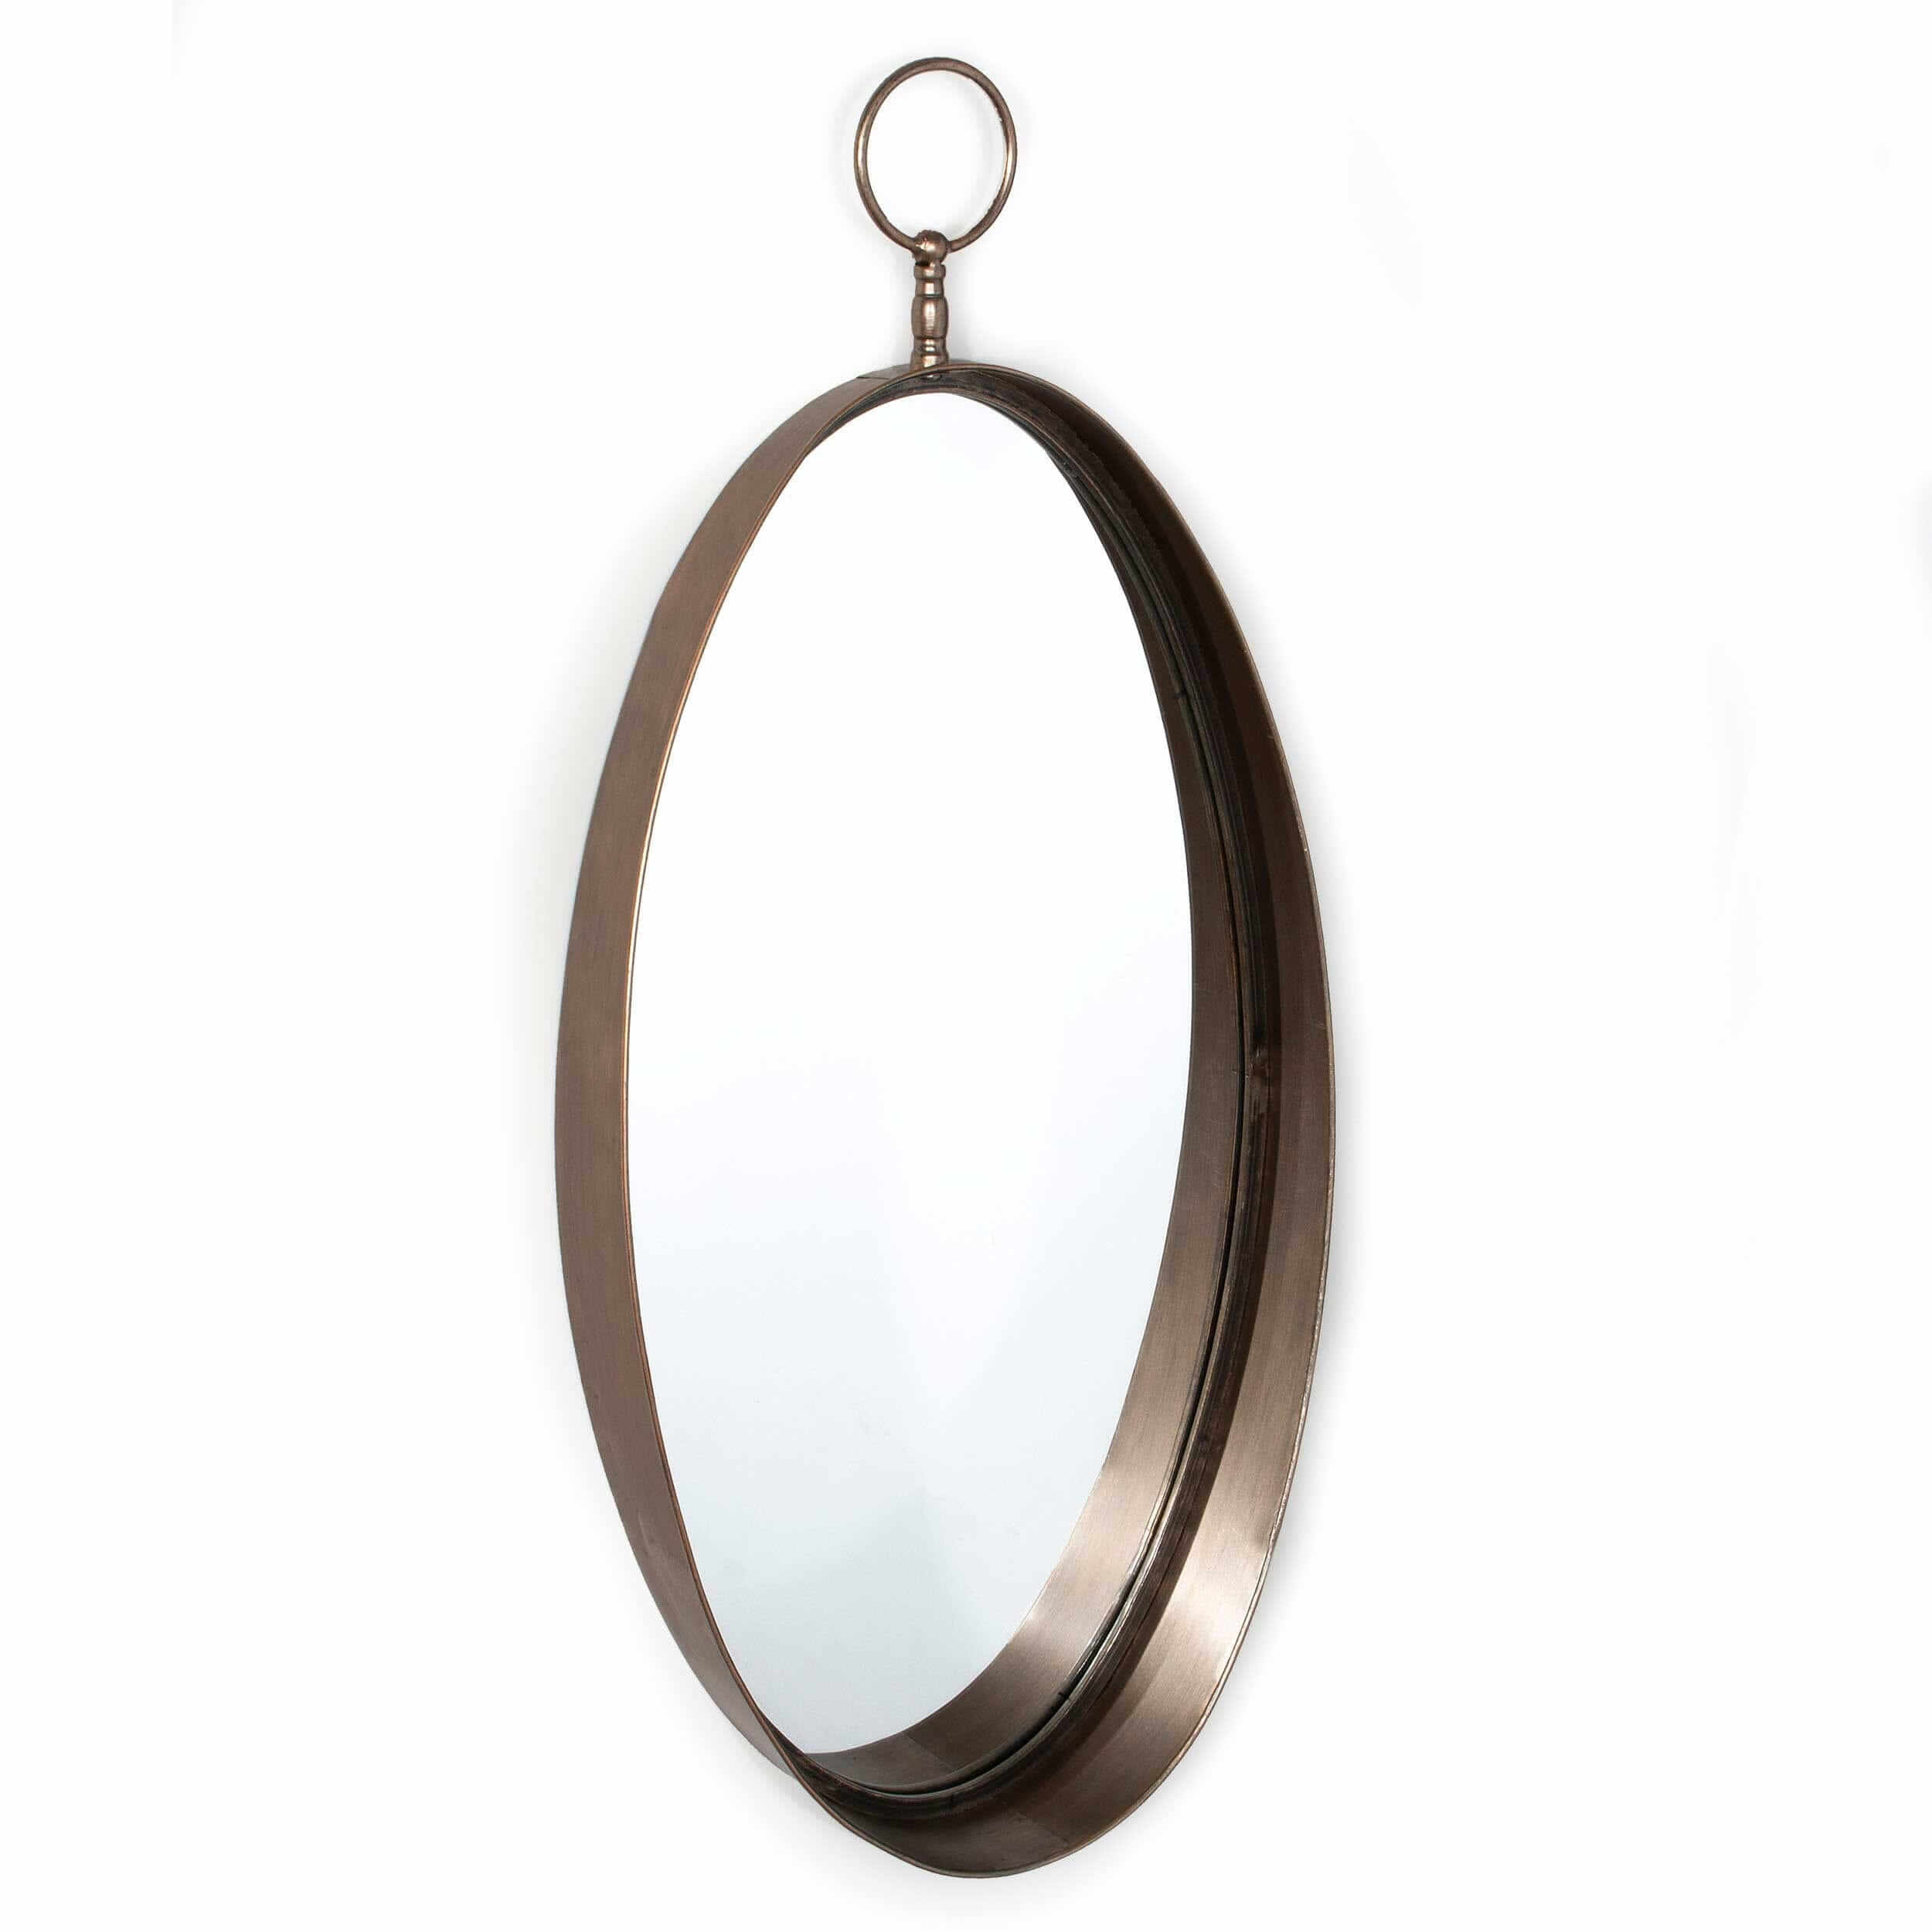 Timeless vertical oval Macklin mirror featuring a dark bronze frame with a polished top ring for mounting, showcased against a clean white backdrop.